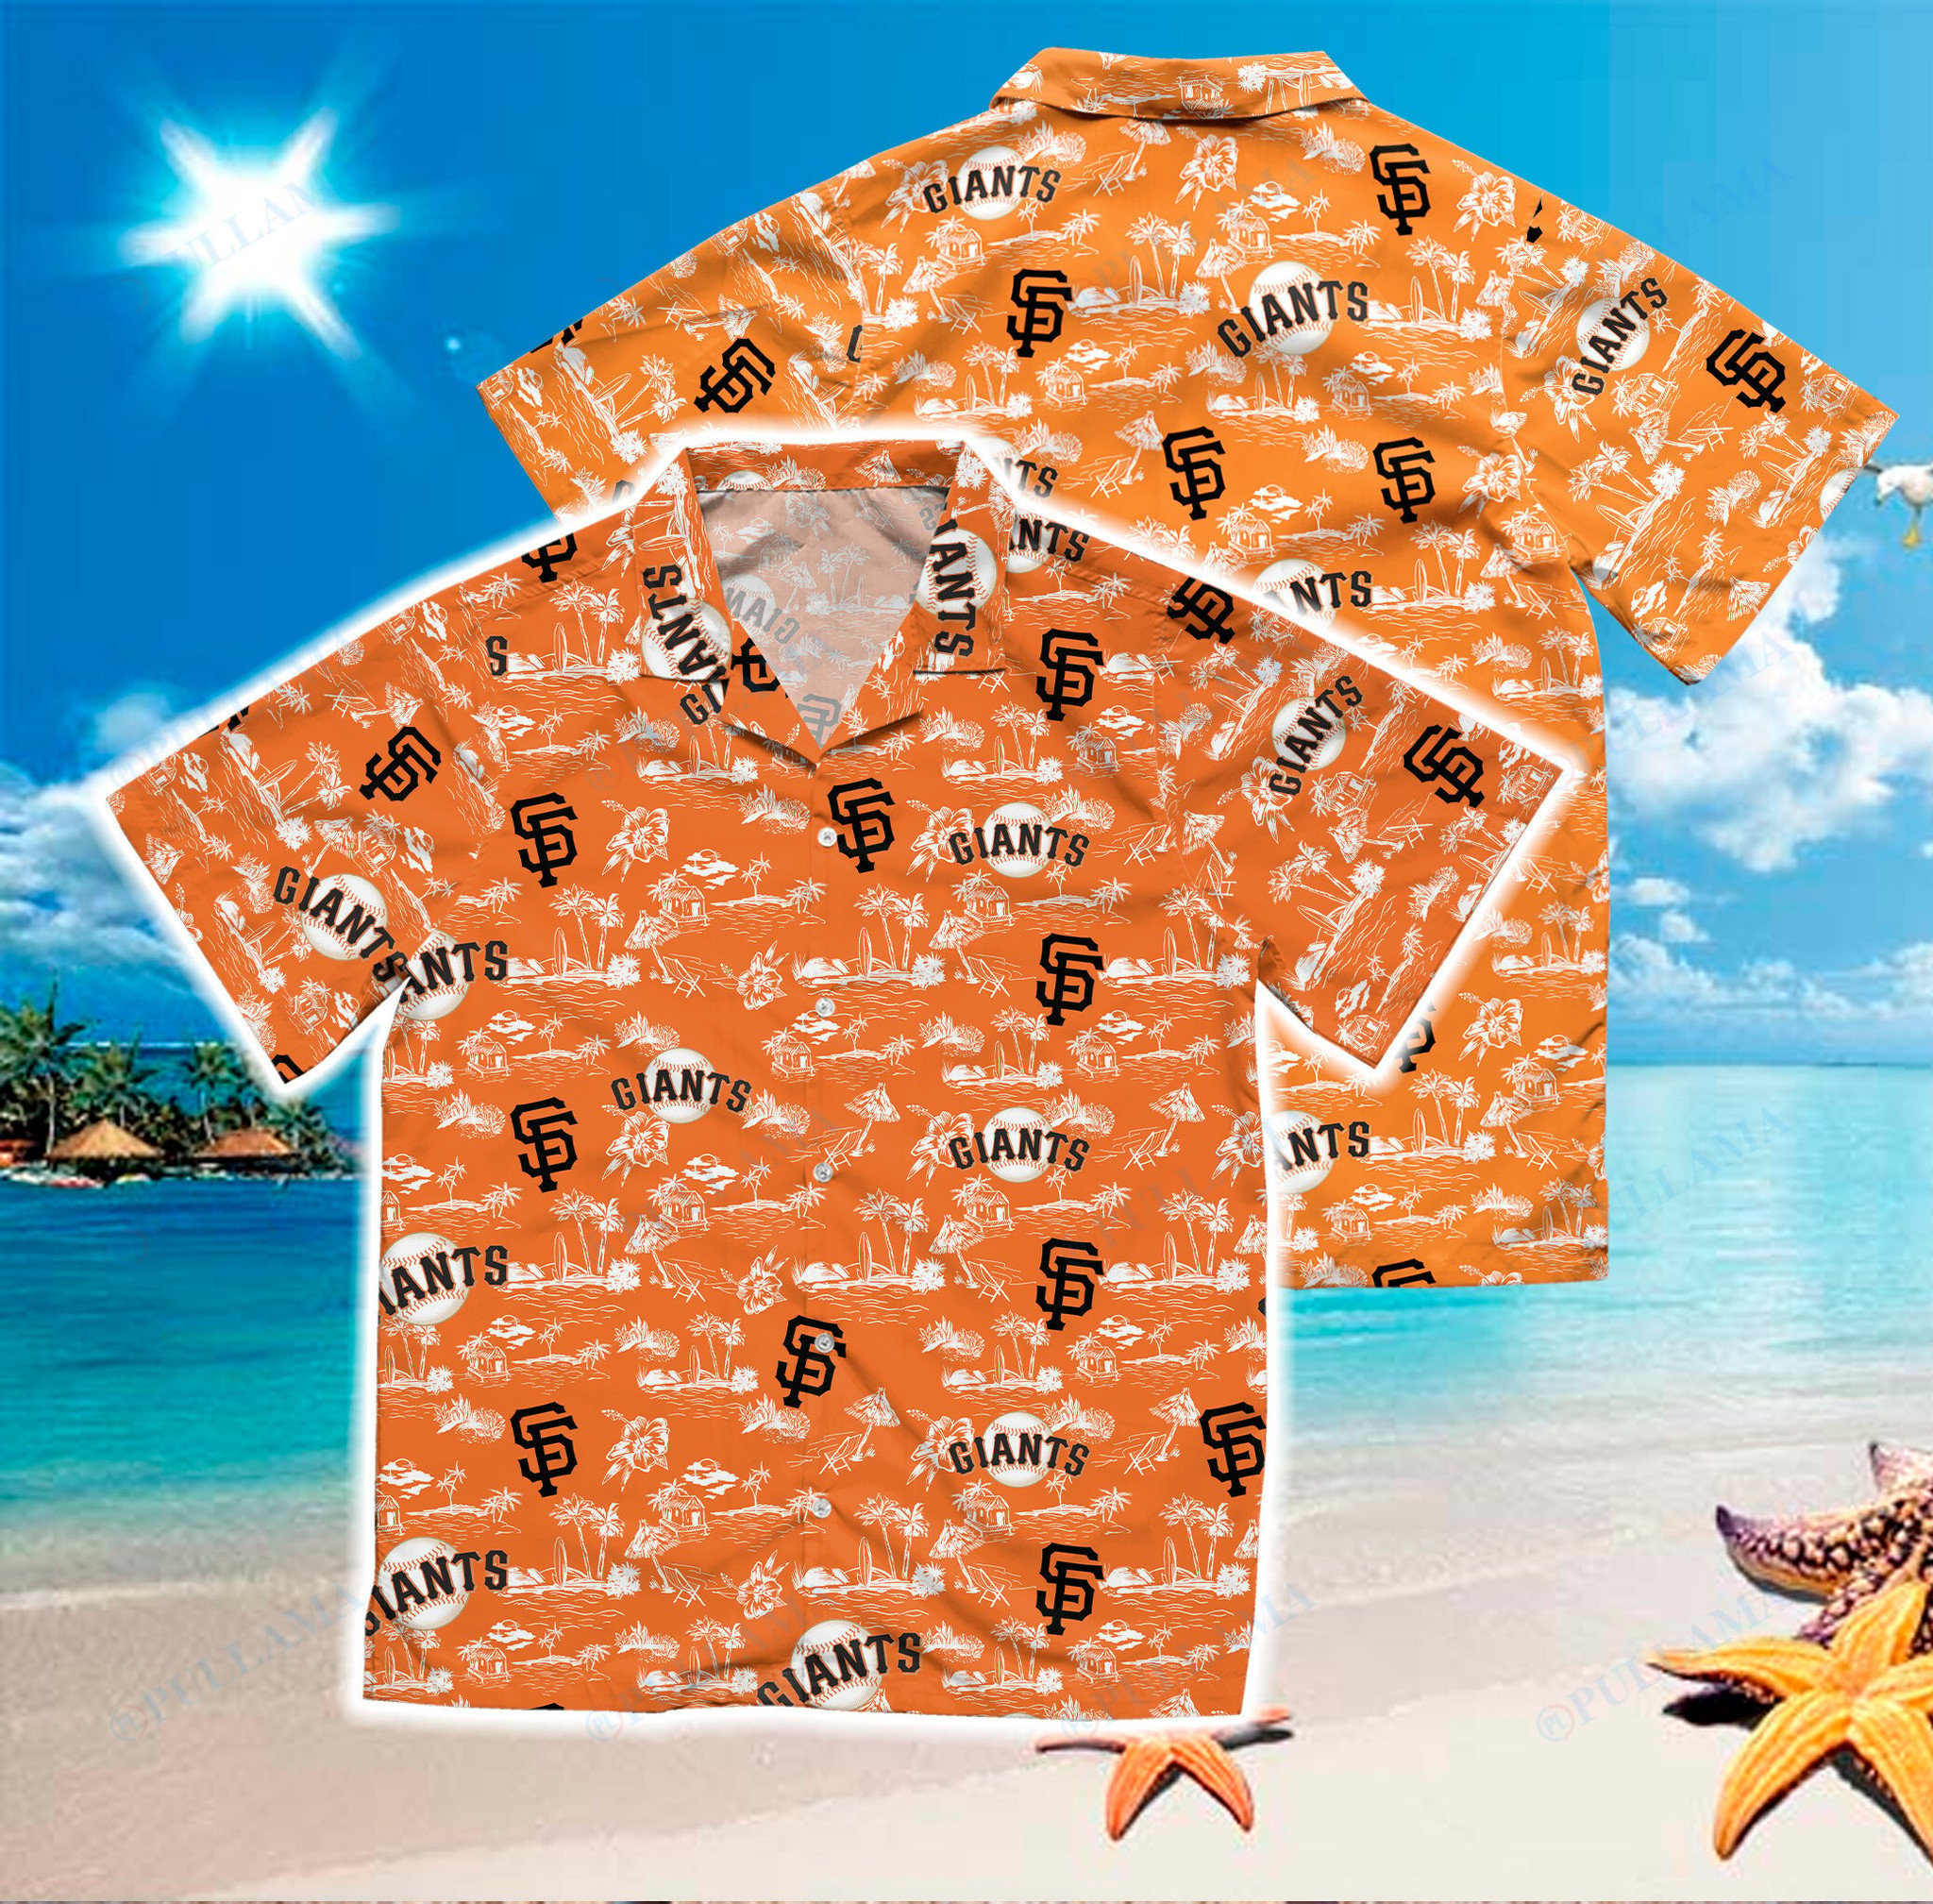 If you're looking for a NHL Hawaiian shirt to wear, don't wait until the last minute! 194